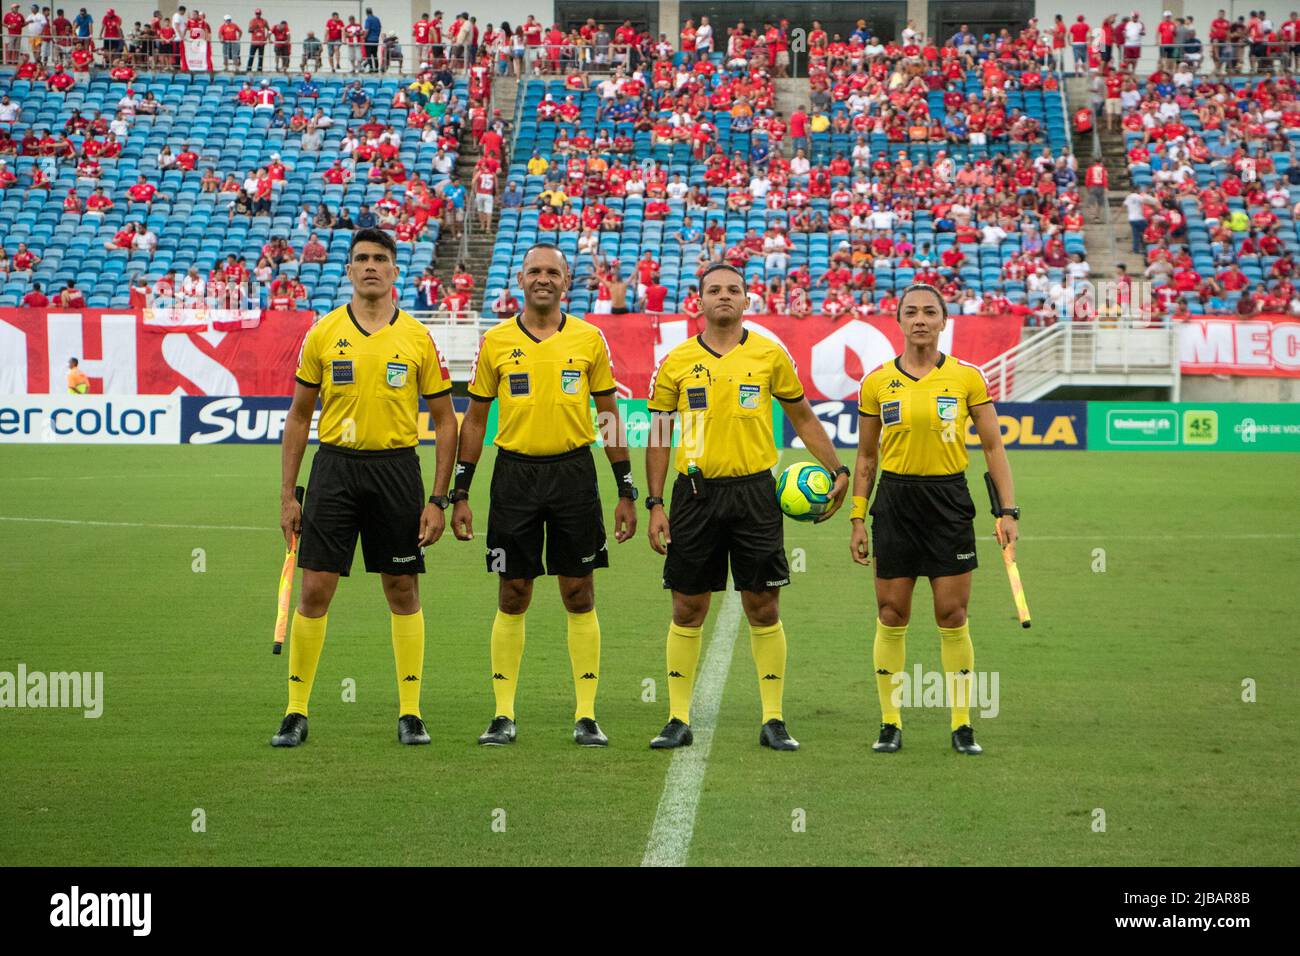 Natal, Brazil. 04th June, 2022. RN - Natal - 04/06/2022 - BRAZILIAN D 2022, AMERICA X ICASA - The referee during a match between America-RN and Icasa at the Arena das Dunas stadium for the Brazilian championship D 2022. Photo: Augusto Ratis/AGIF/Sipa USA Credit: Sipa USA/Alamy Live News Stock Photo